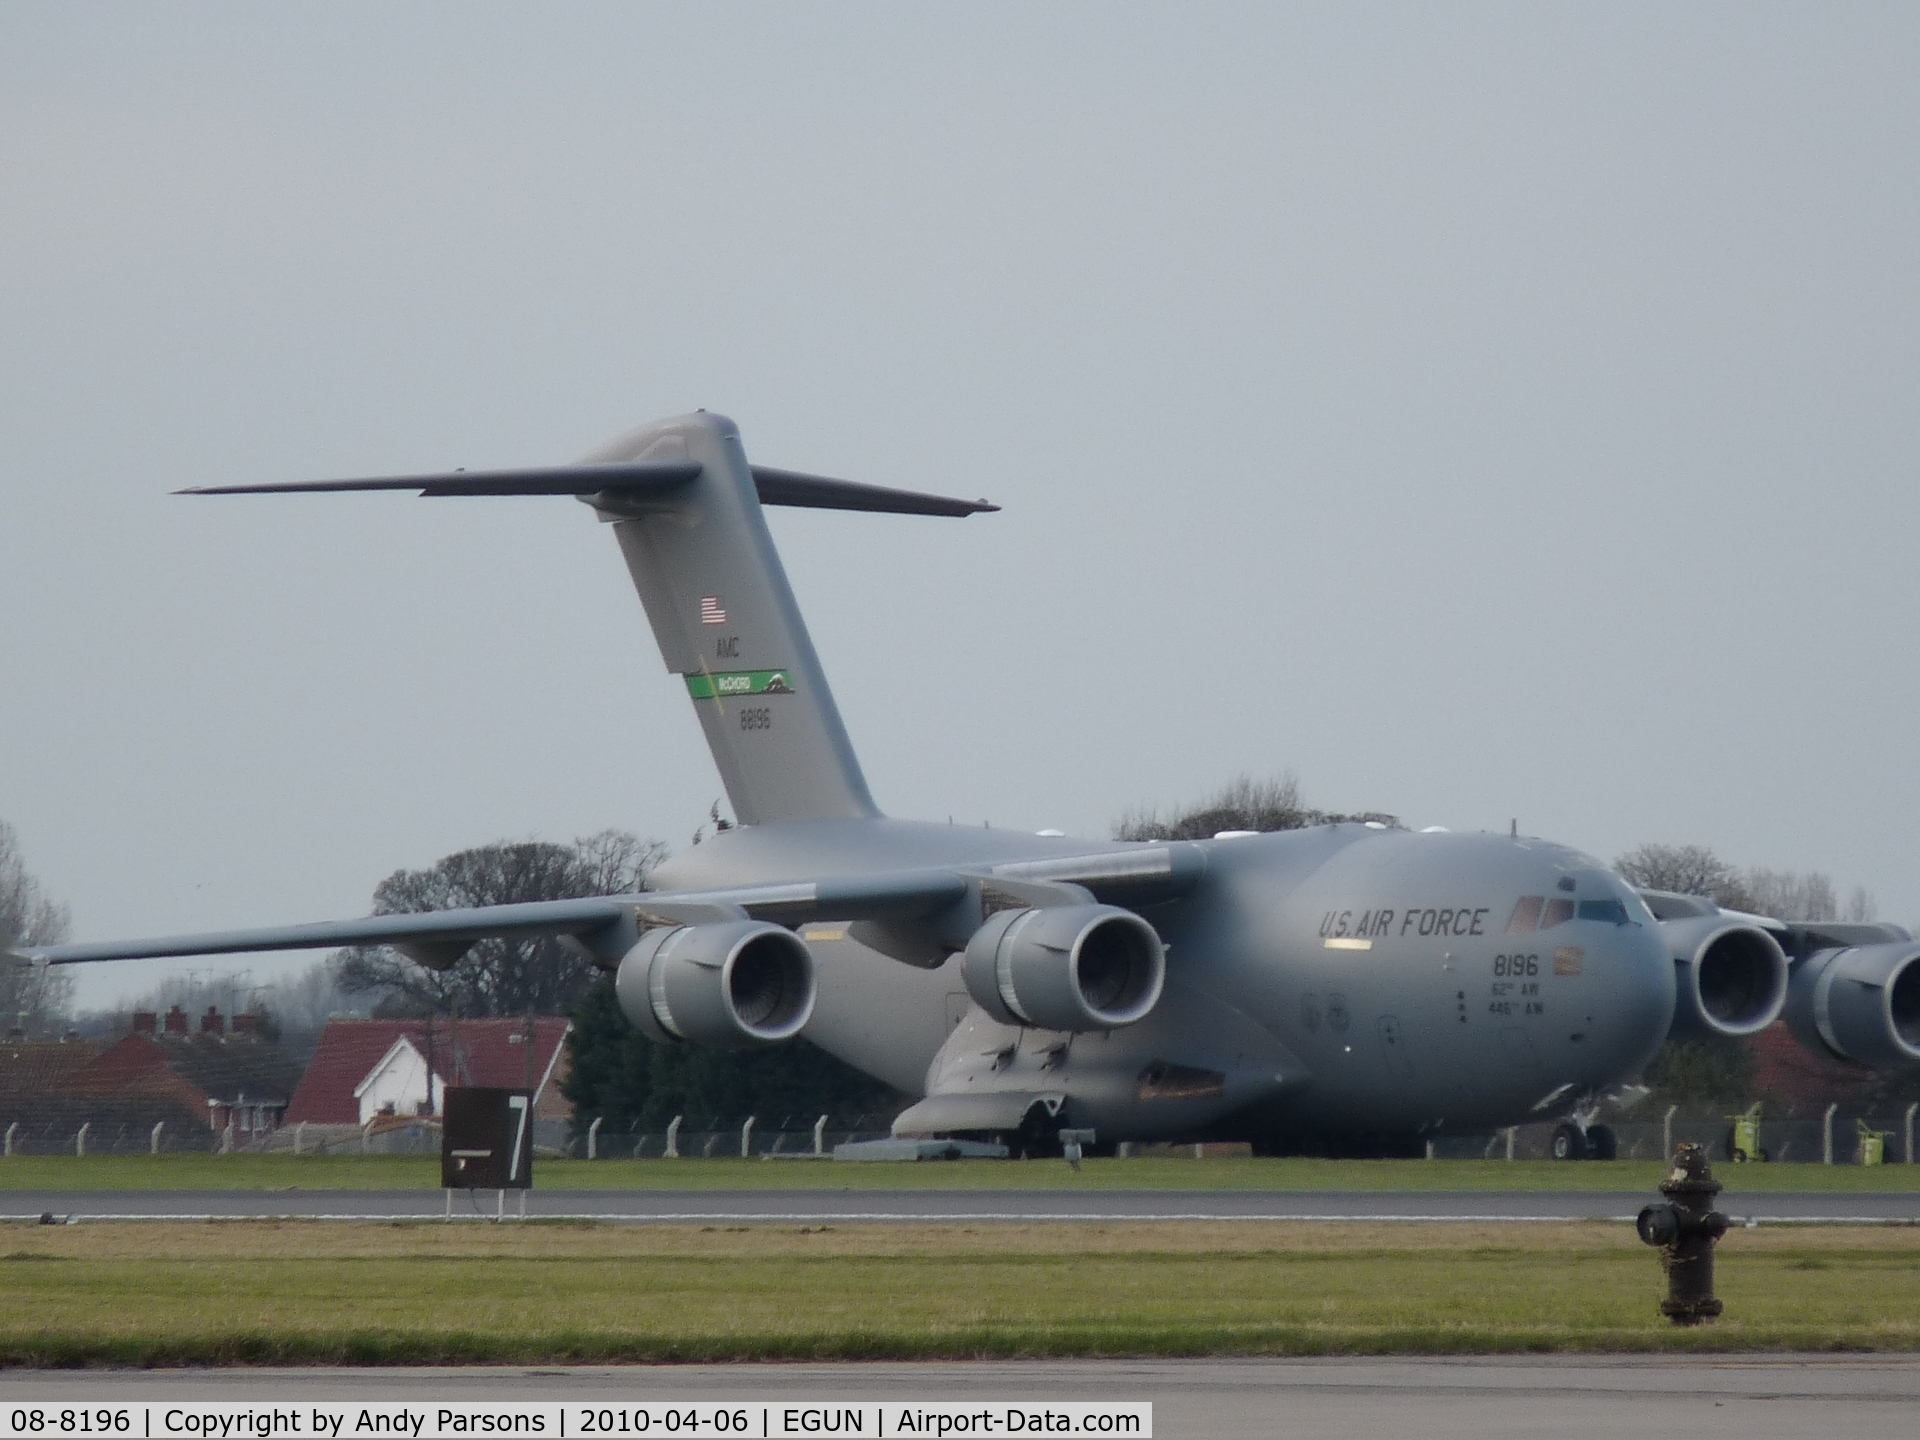 08-8196, 2010 Boeing C-17A Globemaster III C/N P-196, Shot at Mildenhall on its 1st vist just a couple of weeks old